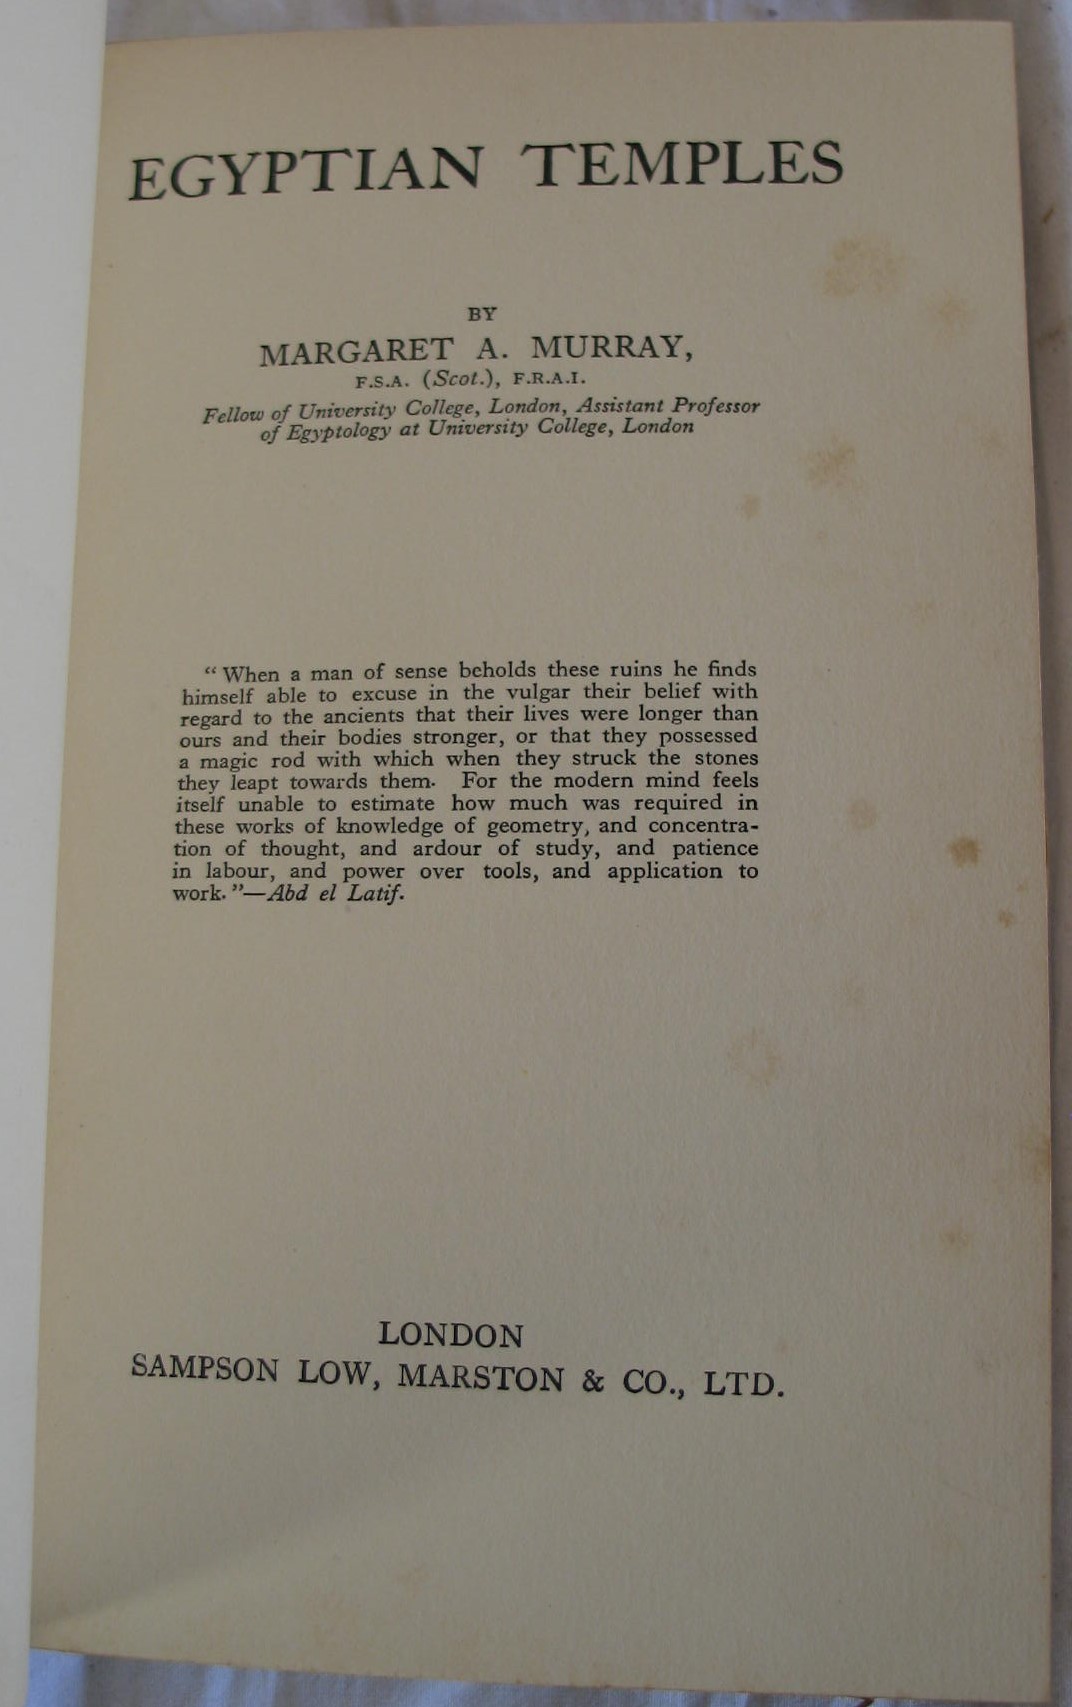 [OCCULT / EGYPT] MURRAY (Margaret) Egyptian Temples, 8vo, illus., half morocco, SIGNED & - Image 2 of 2